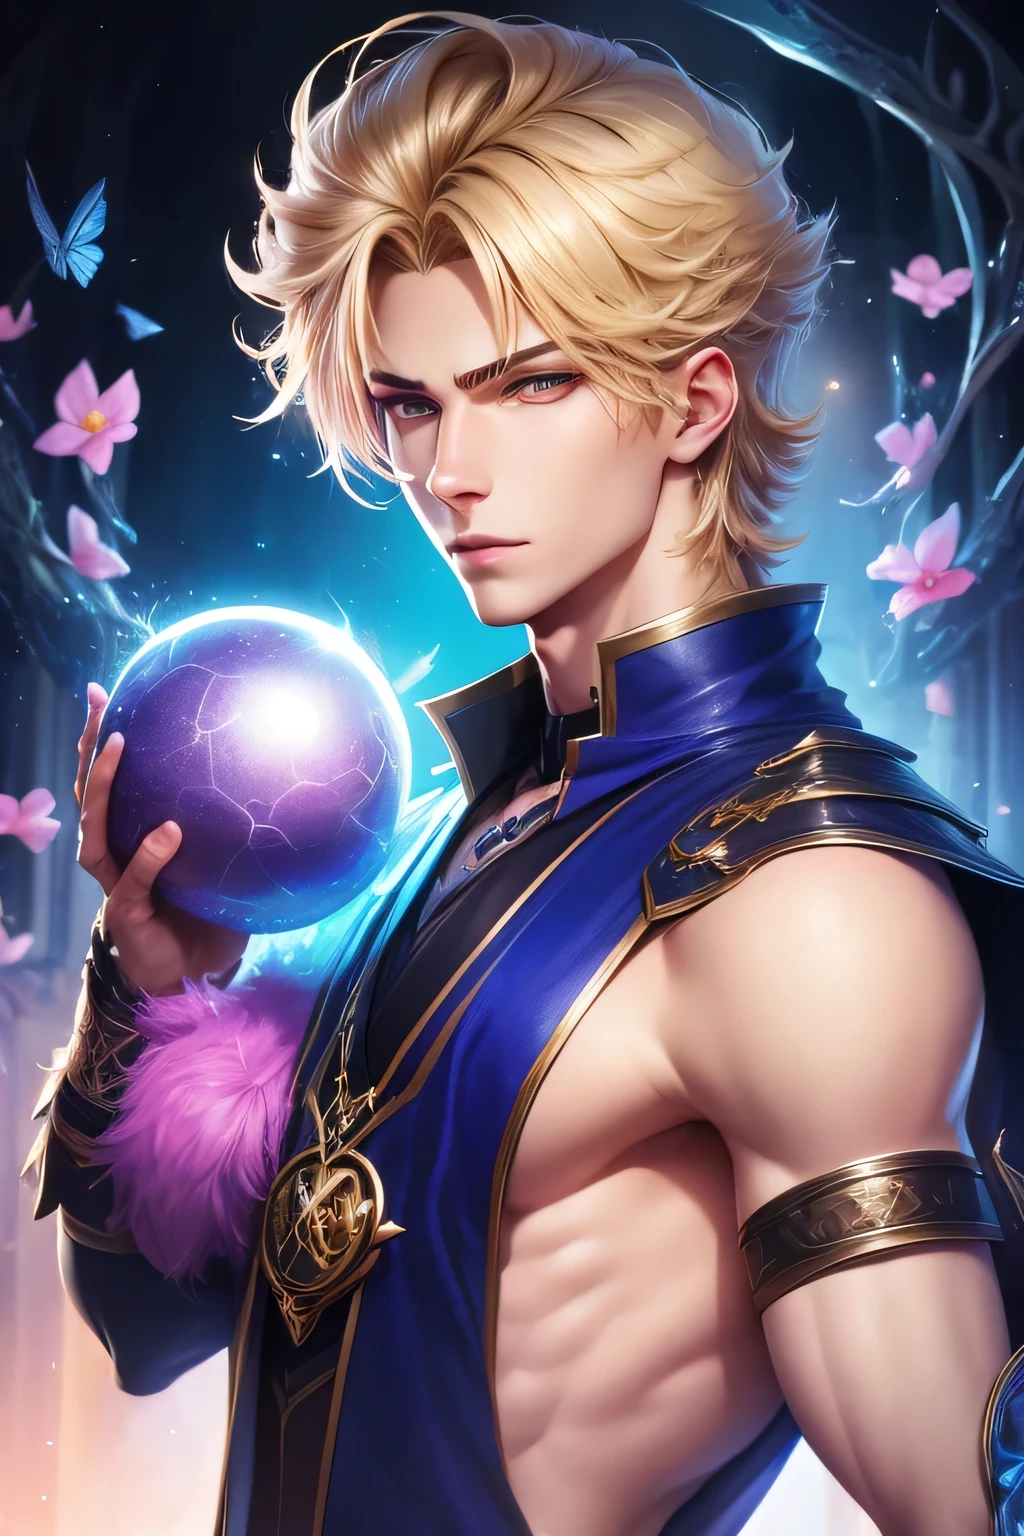 a cartoon image of a young boy holding a sparkle ball, portrait of magical blond prince, beautiful androgynous prince, delicate androgynous prince, official fanart, russell dauterman, detailed fanart, demon slayer rui fanart, highly detailed exquisite fanart, avatar image, star , high quality fanart, handsome guy in demon slayer art, the flower prince, key anime art, twink, naked 